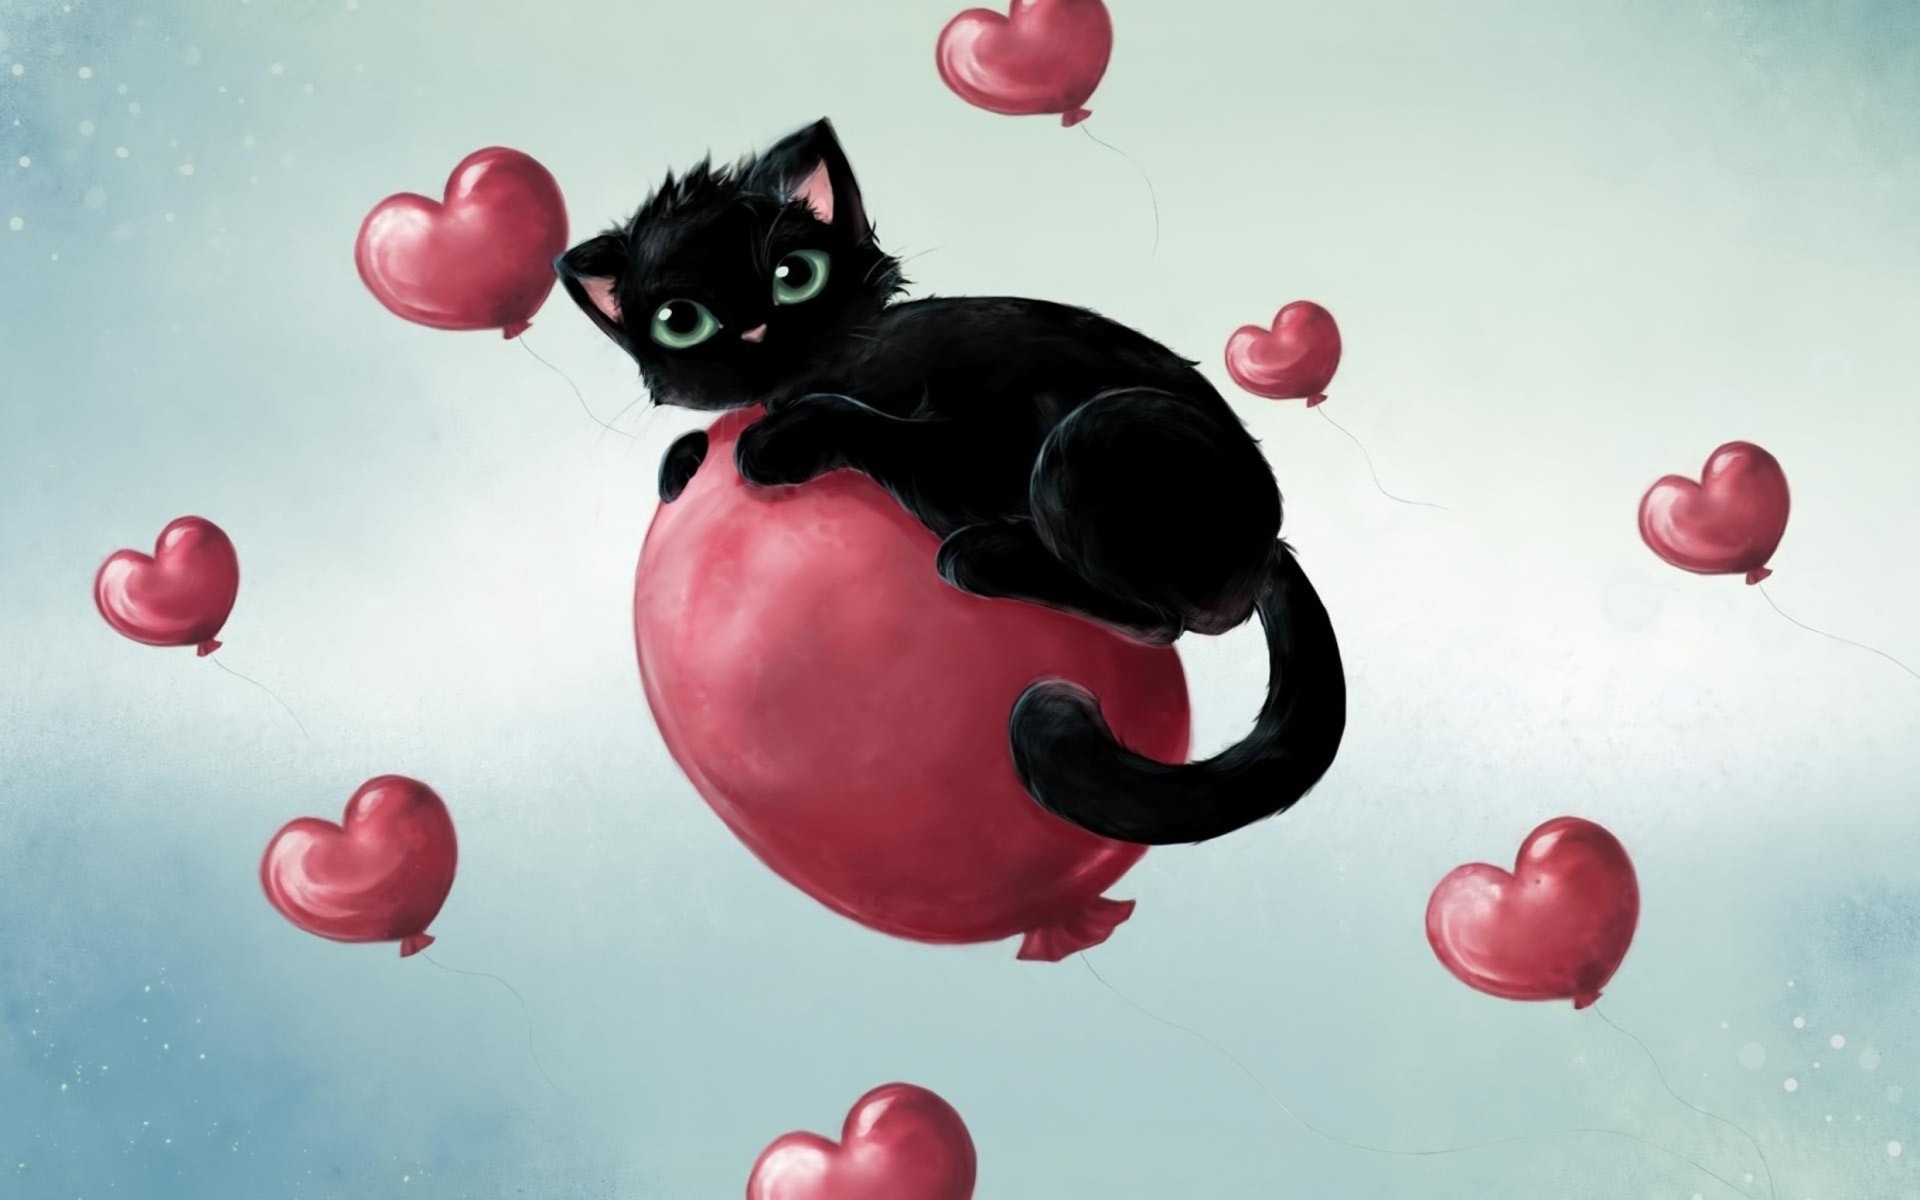 Black Kitty And Red Heart Balloons wallpaper 1920x1200